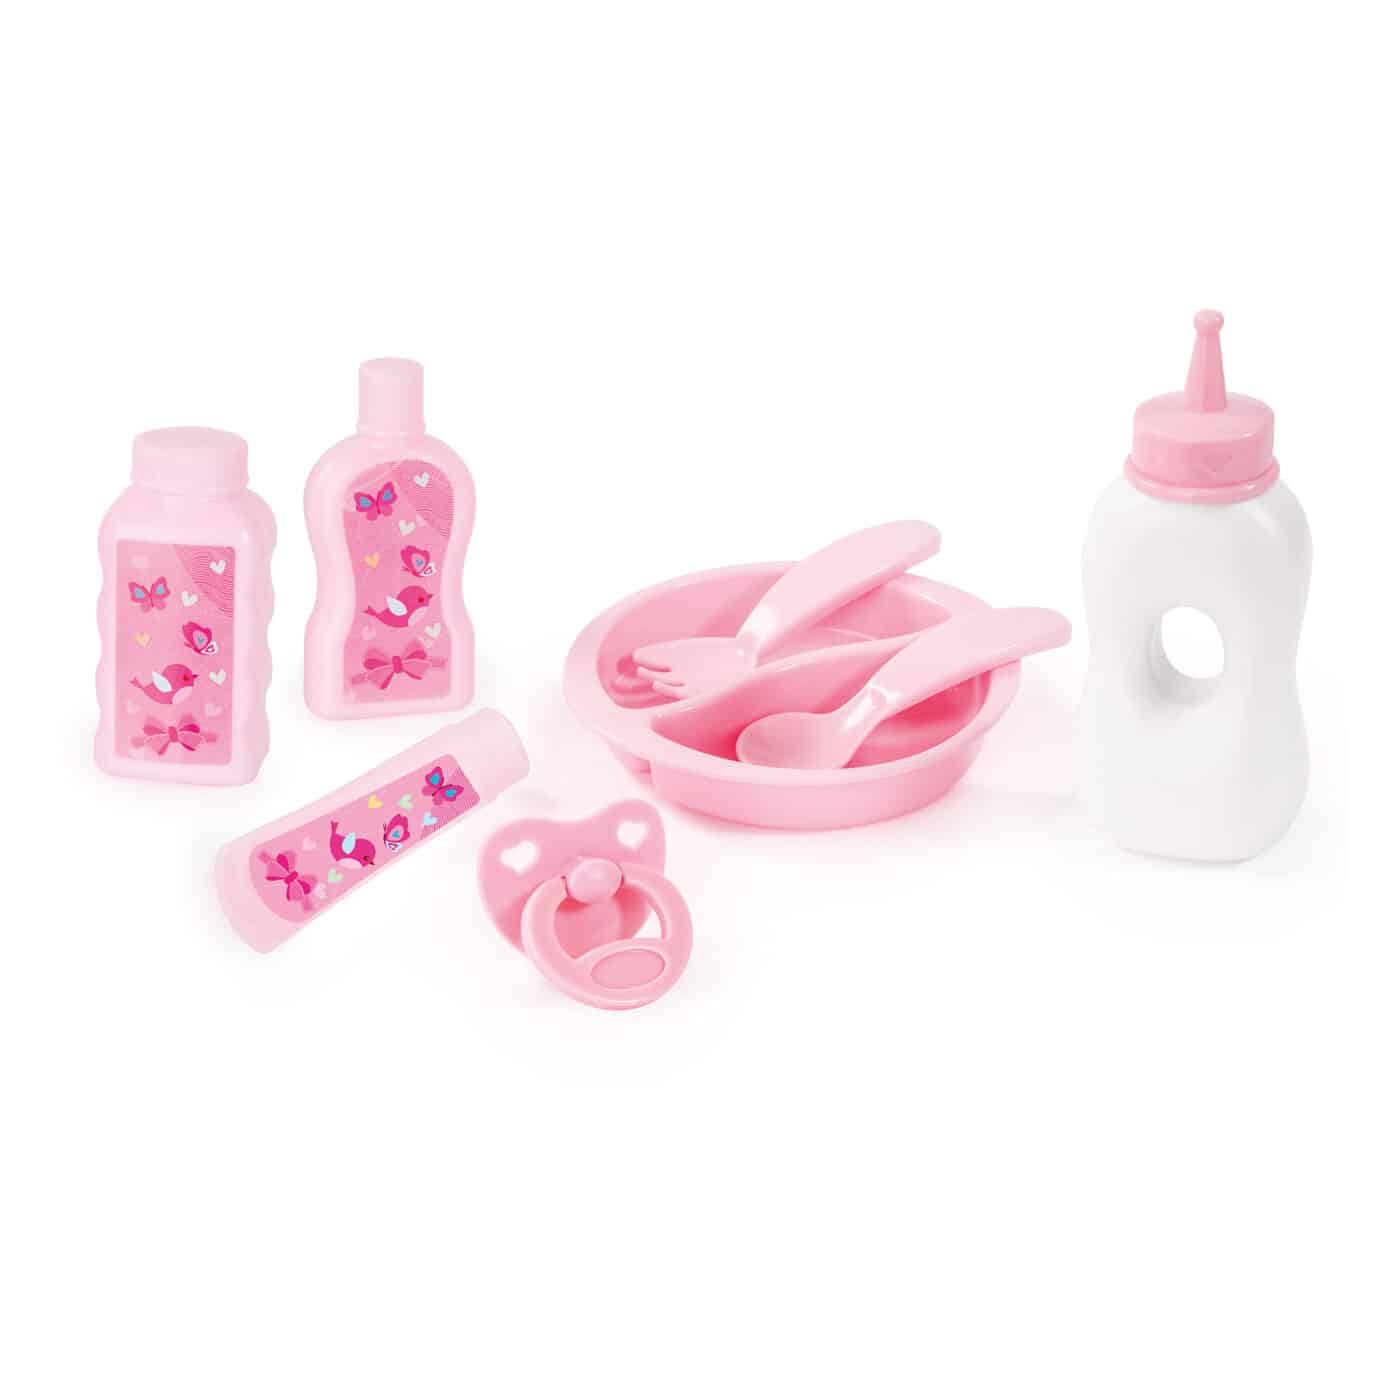 Bayer 11-in-1 Doll Care Set- Grey & pink with Fairy